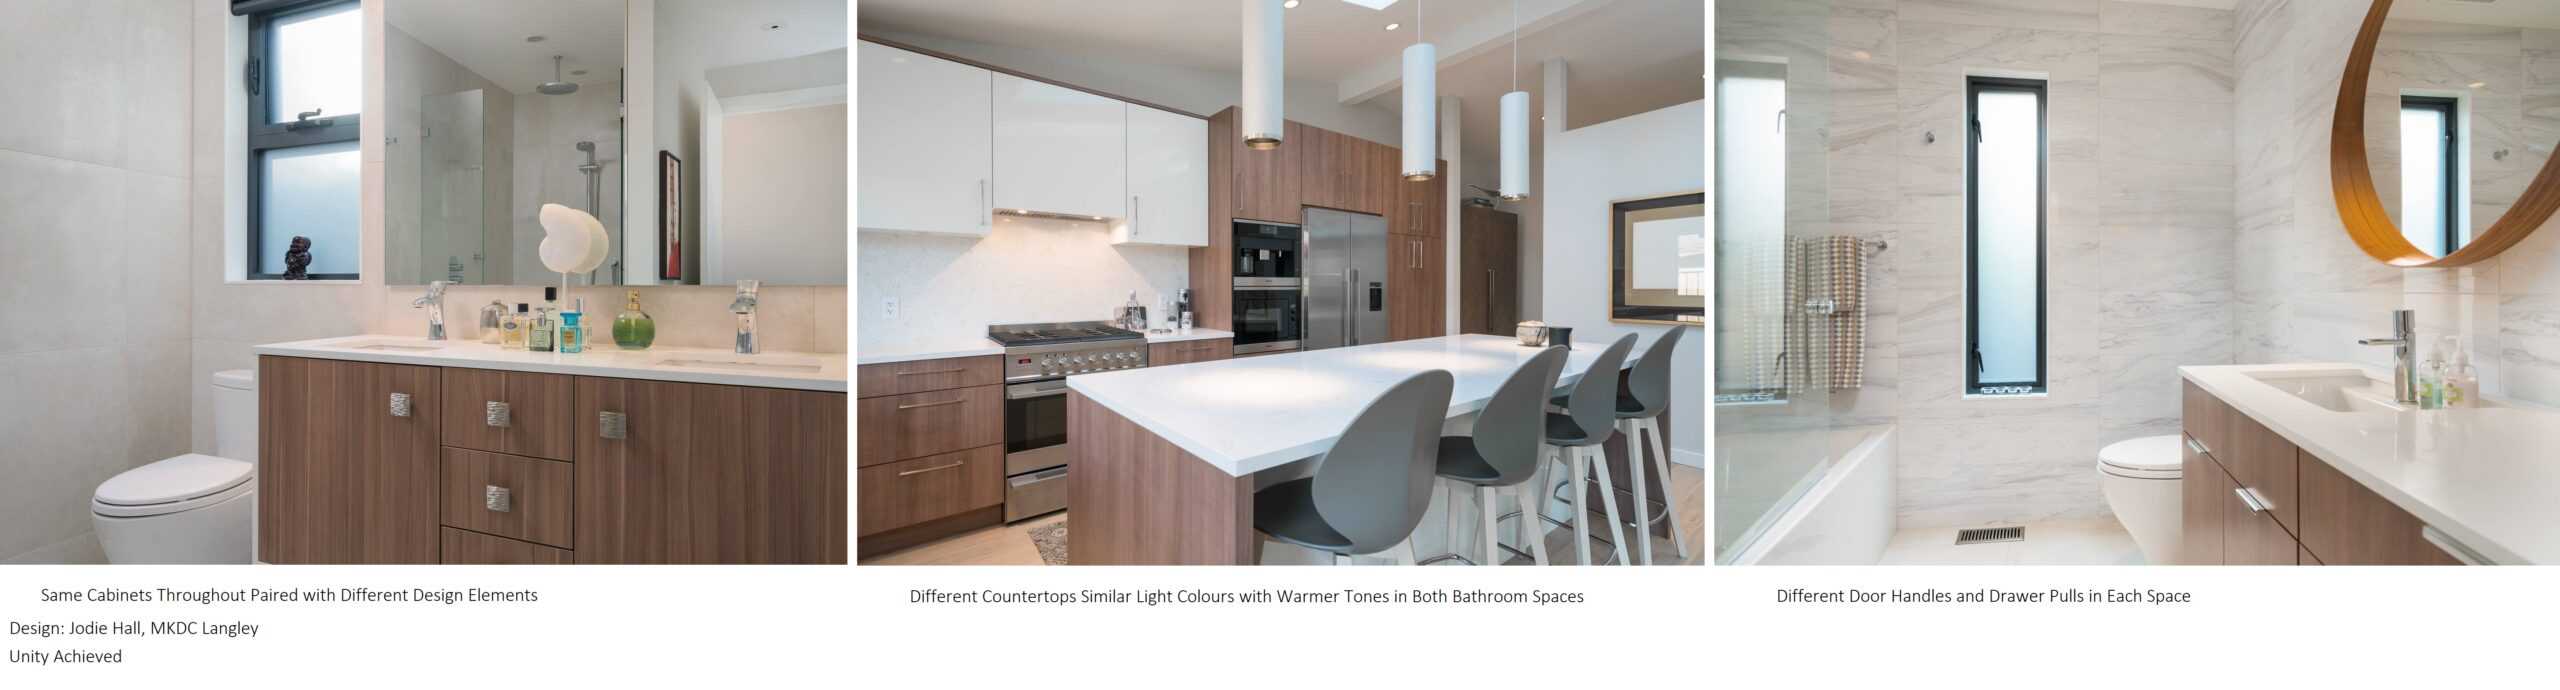 Merit Kitchens Custom Cabinets and Kitchen and Bathroom Designers Calgary